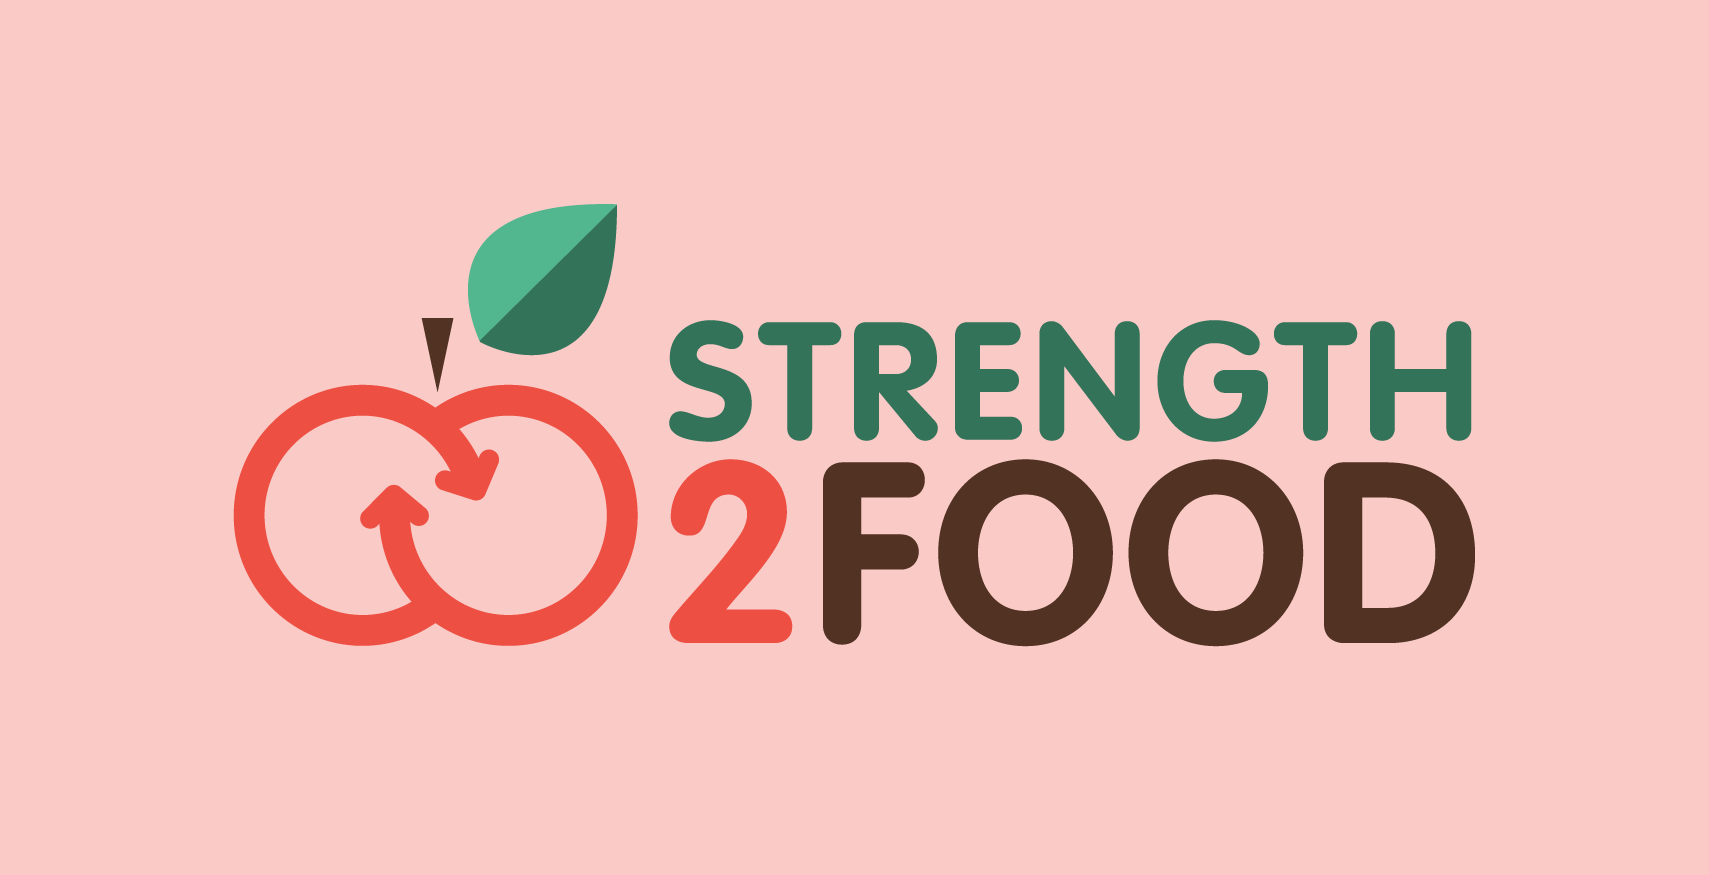 Strength2Food - Strengthening European Food Chain Sustainability by Quality and Procurement Policy